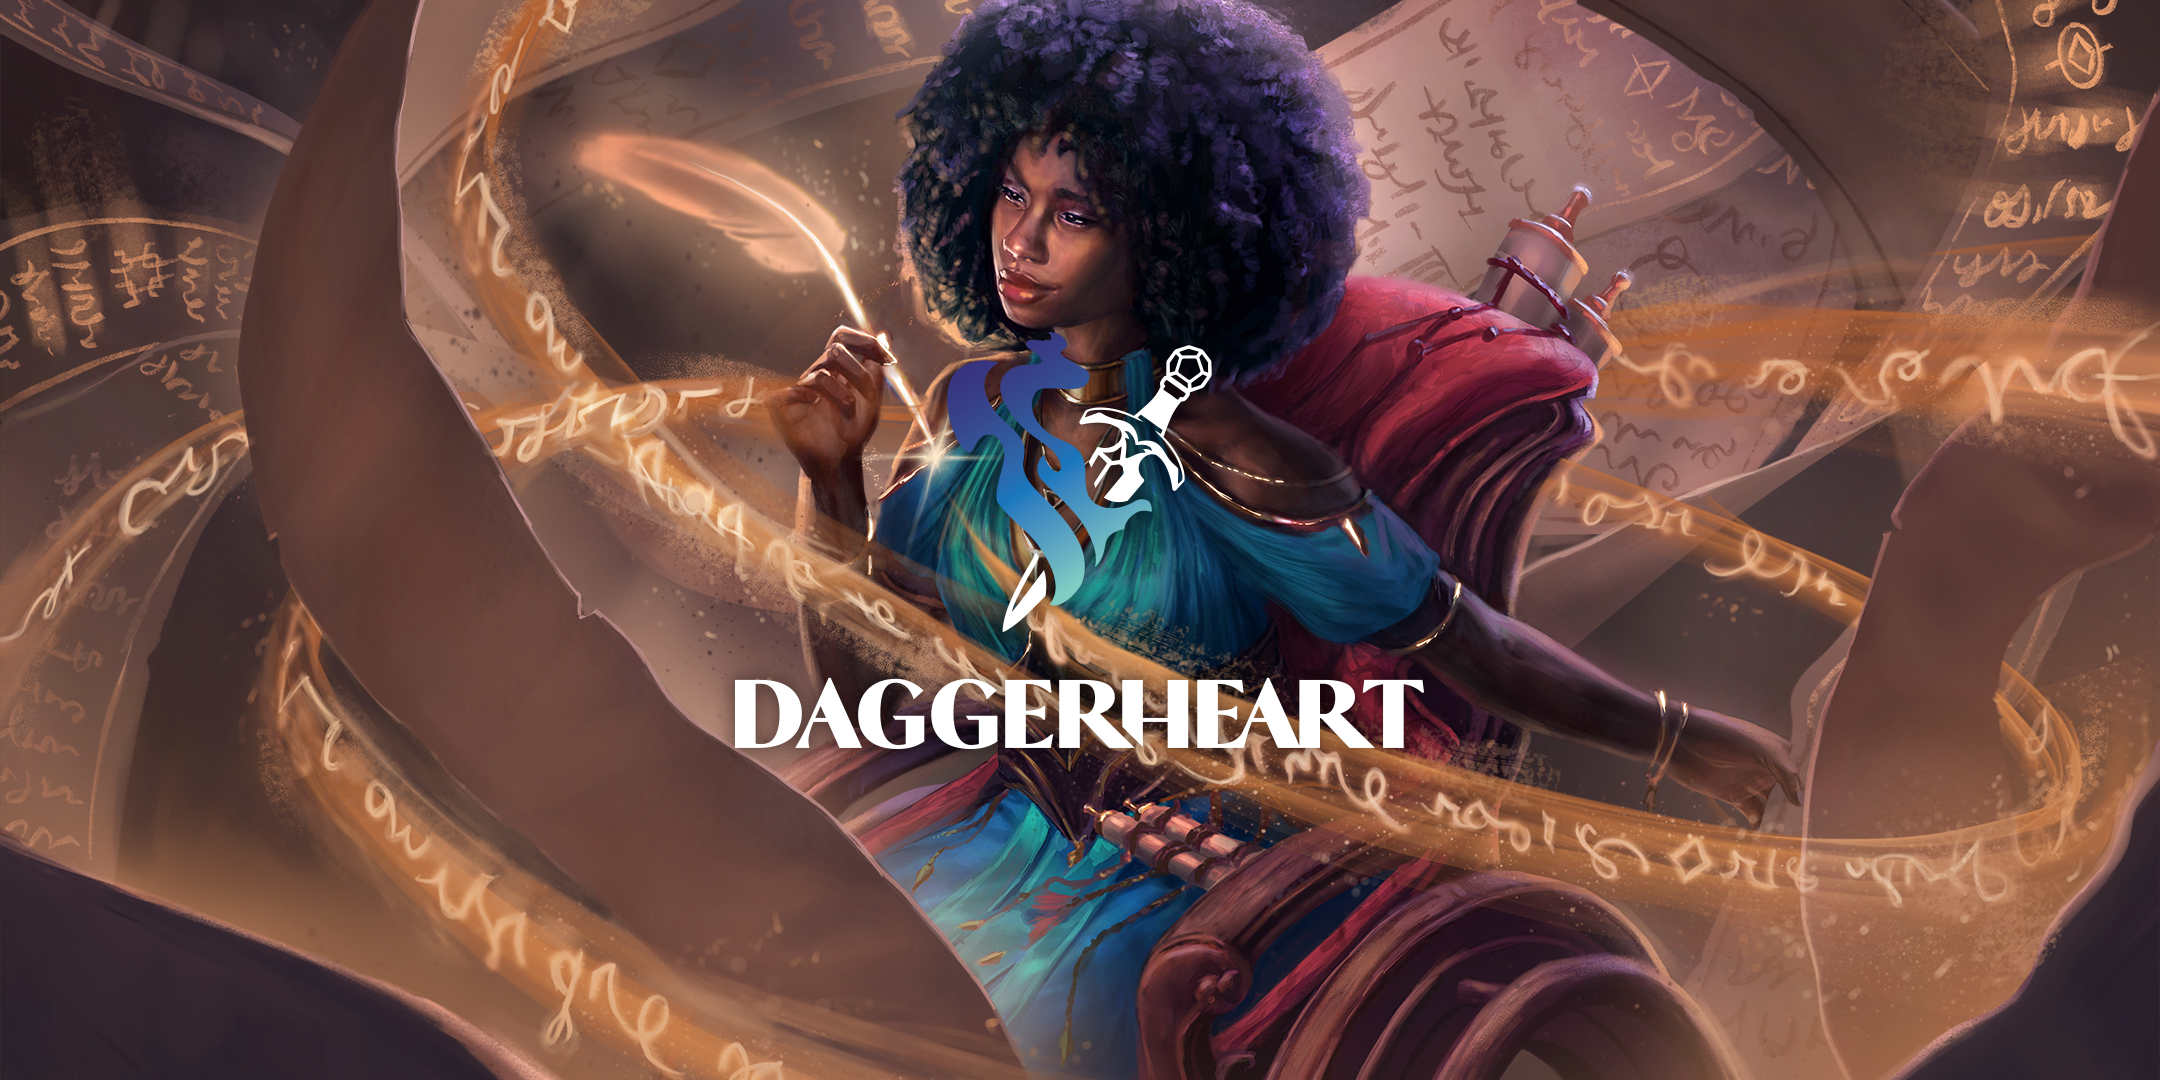 Promotional artwork for Daggerheart showing a woman in fantasy robes weaving a spell with a quill, overlaid with the game’s logo